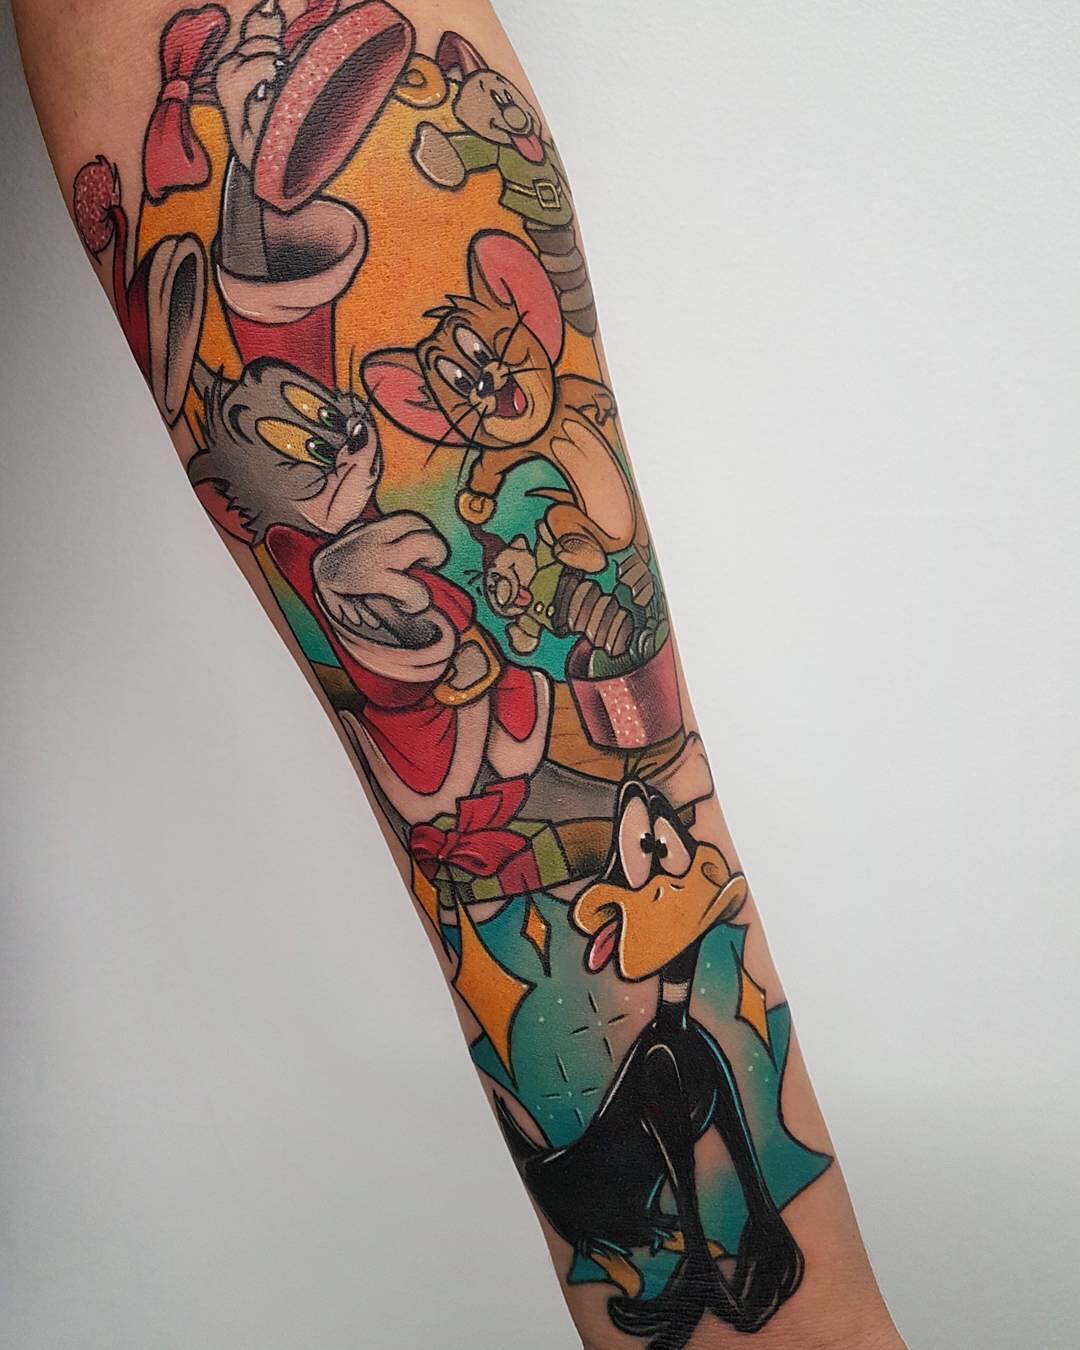 Tom and Jerry tattoo by @ikostattoo